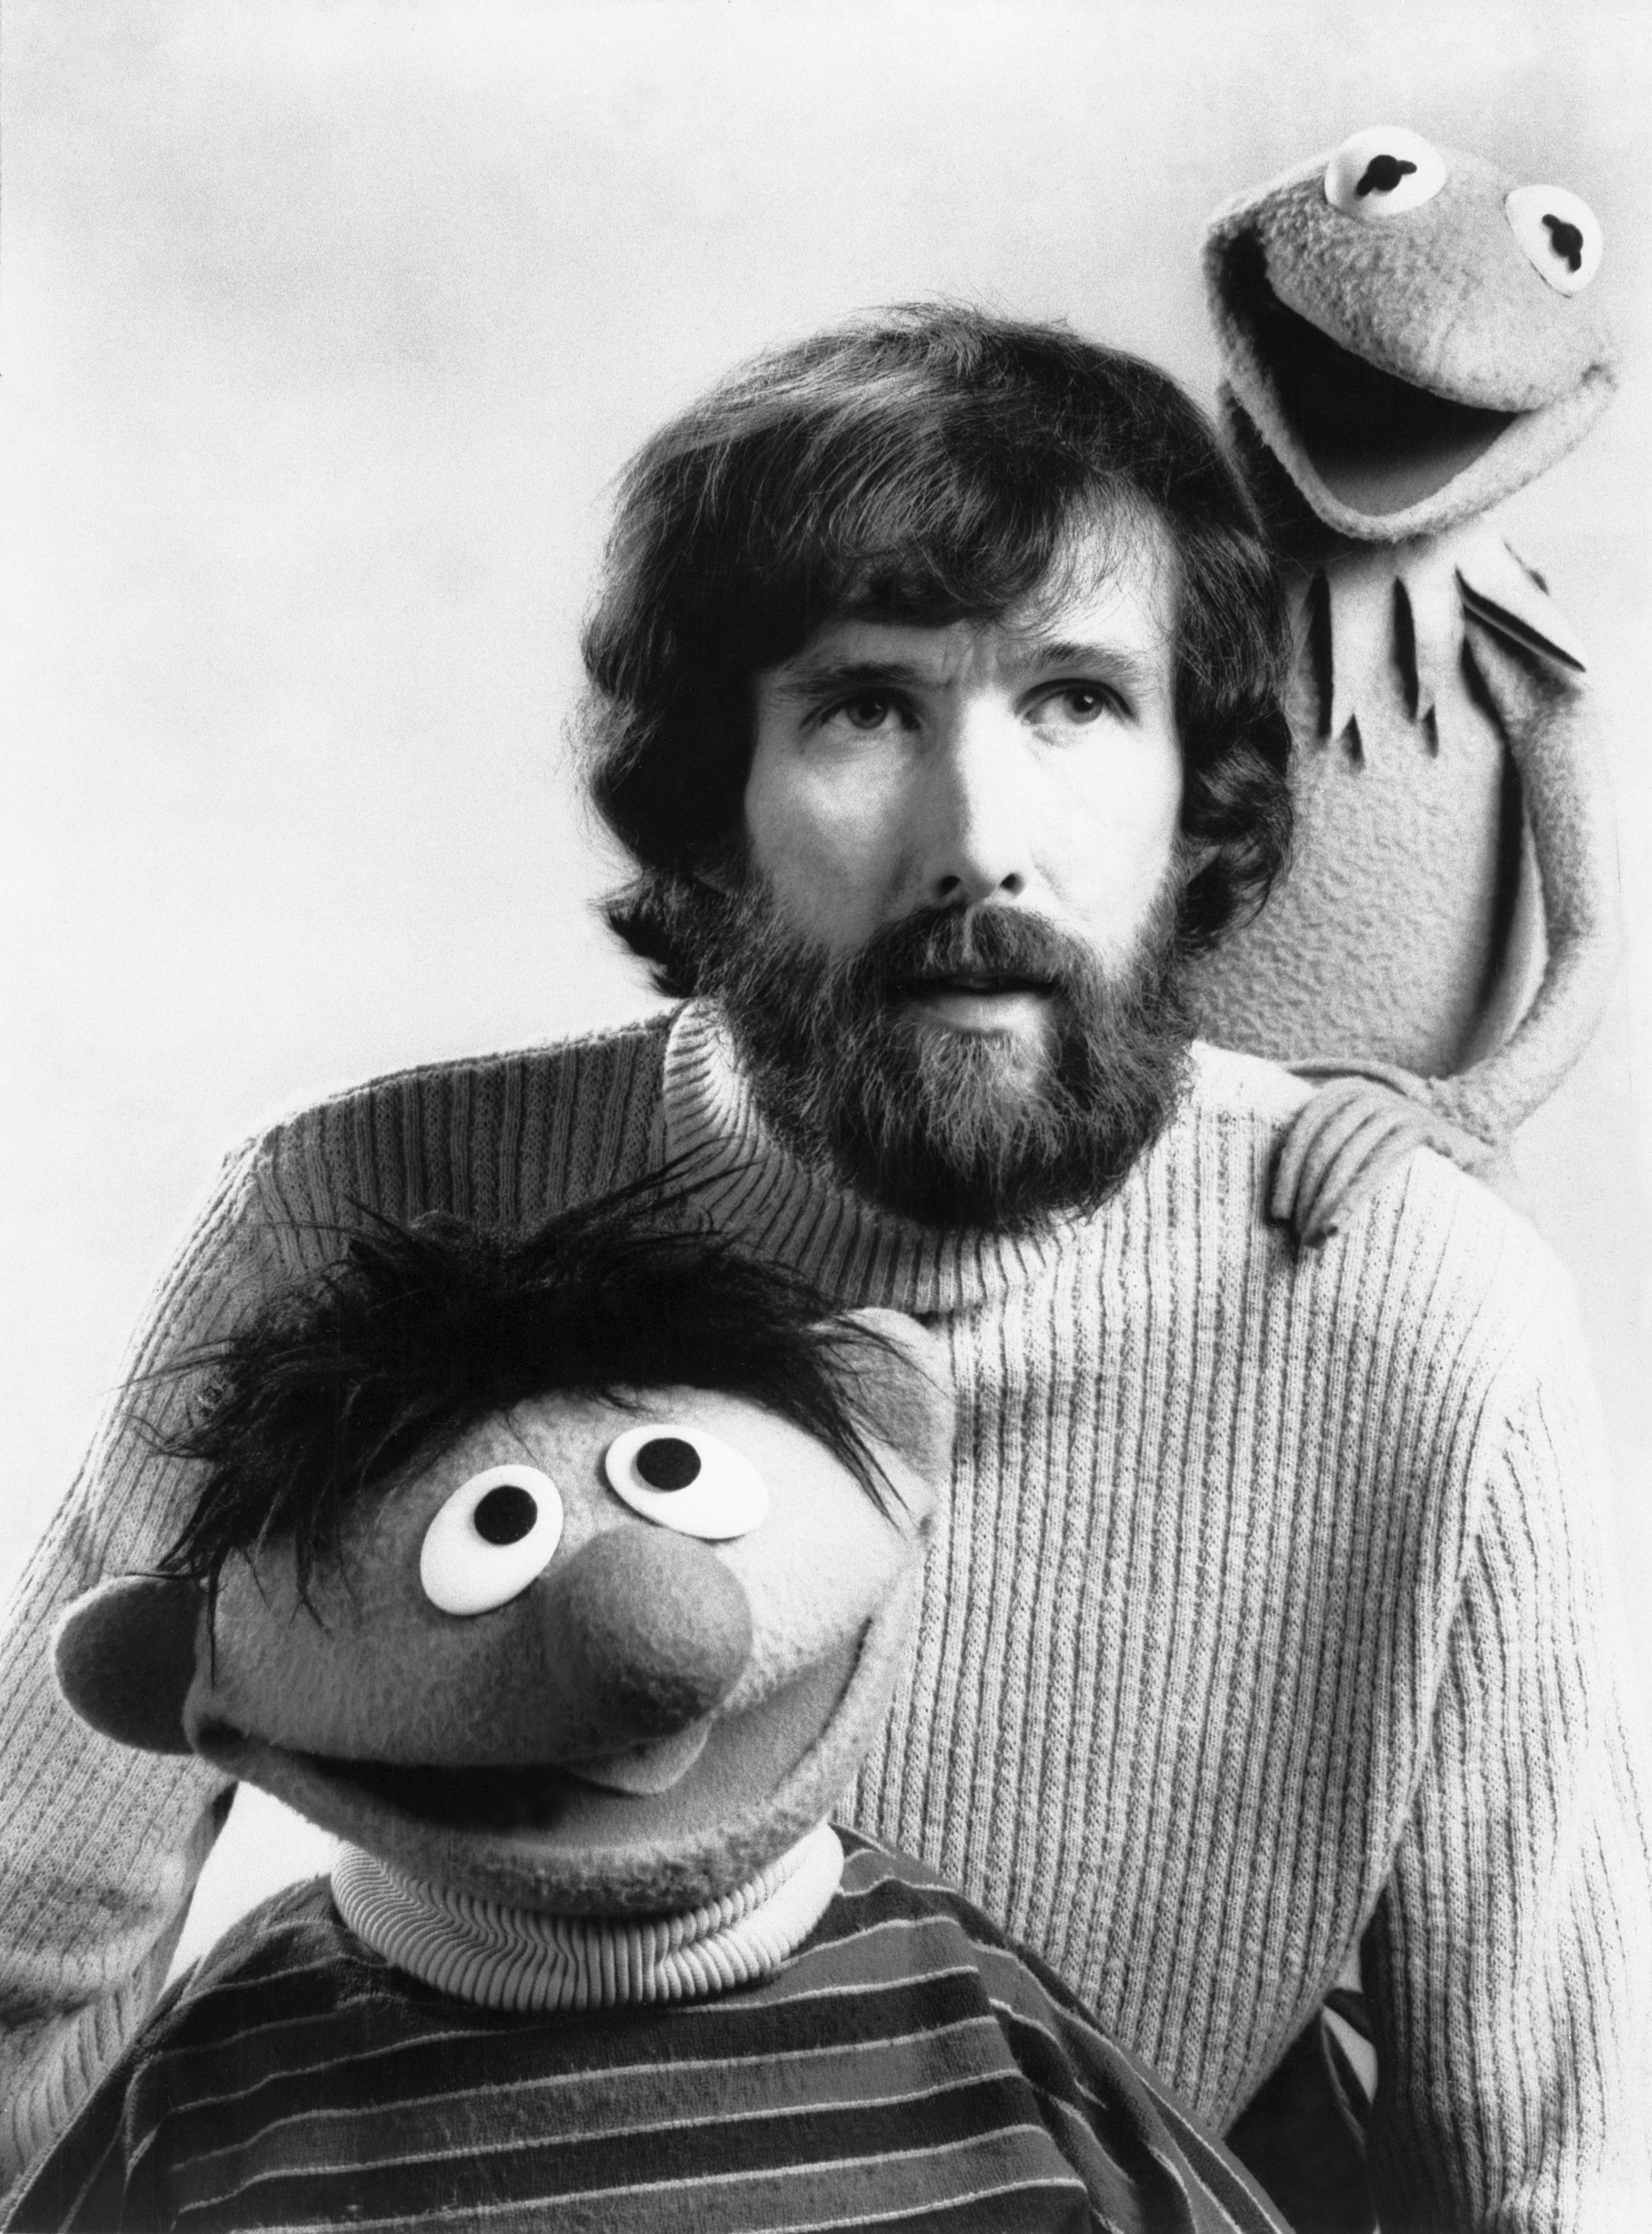 Jim Henson with two of his "Muppets", puppets Kermit The Frog and Ernie, from "Sesame Street". | Source: Getty Images